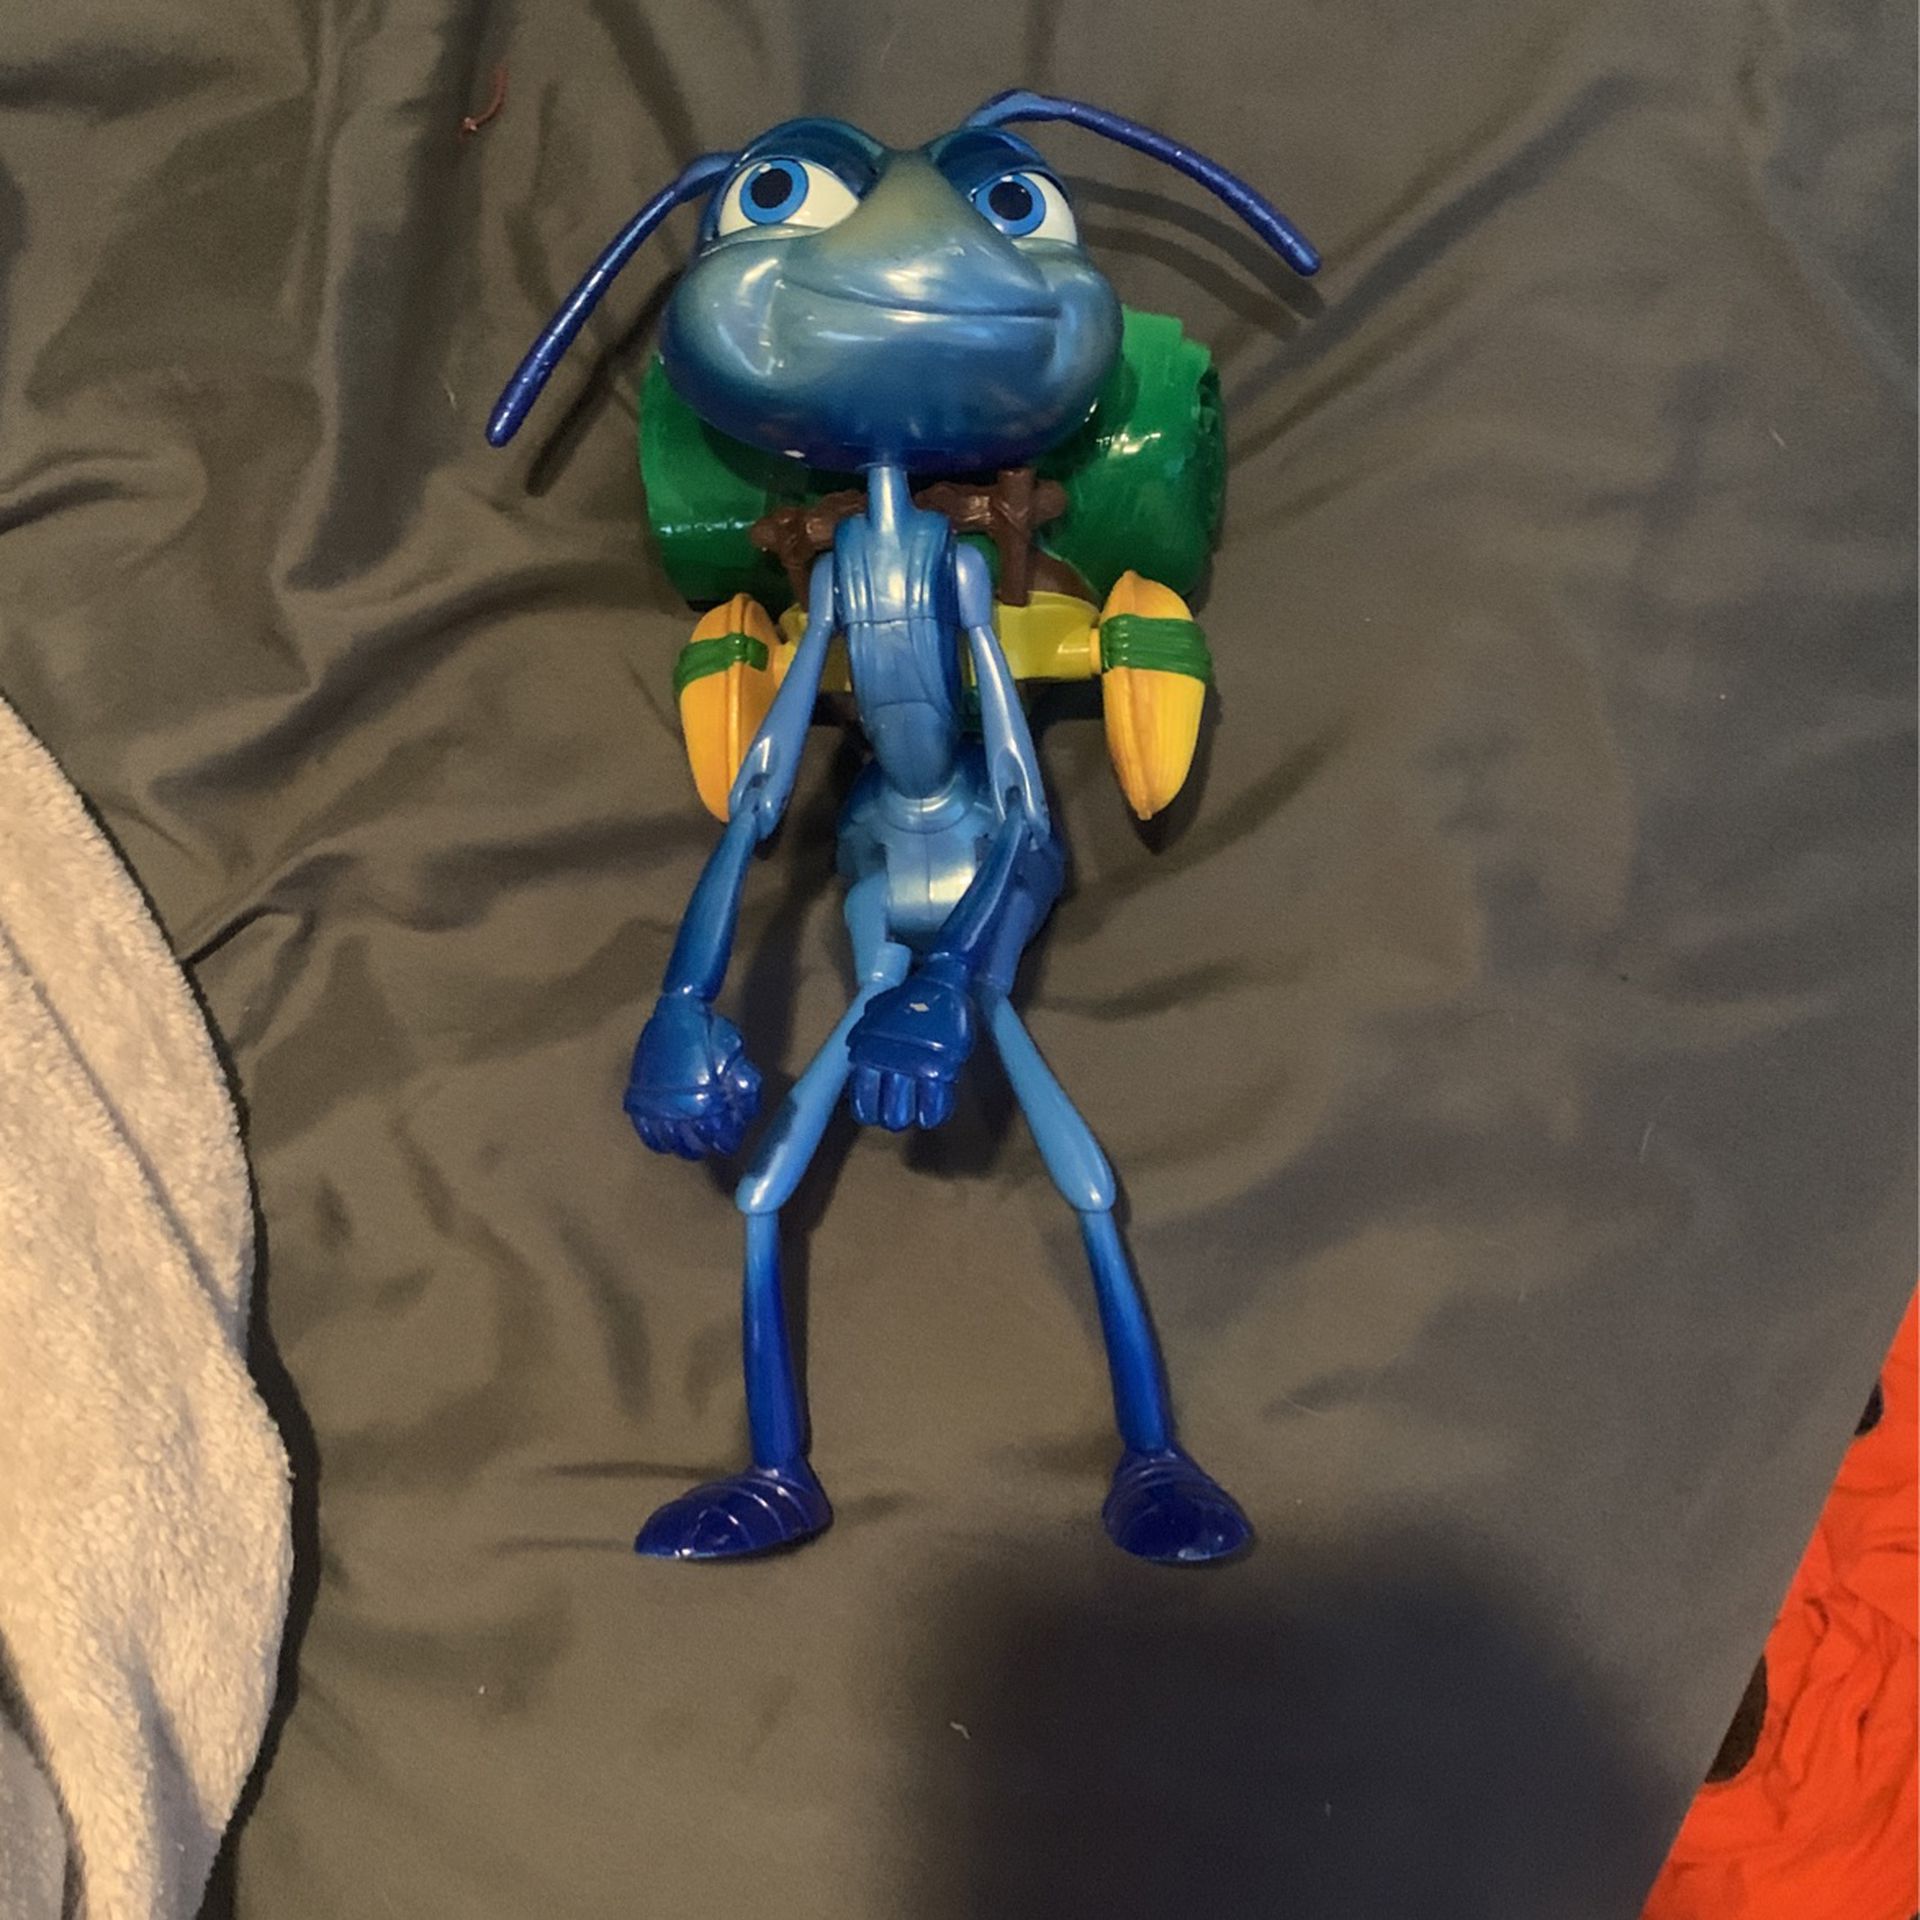 Bugs Life Toy “flicker”